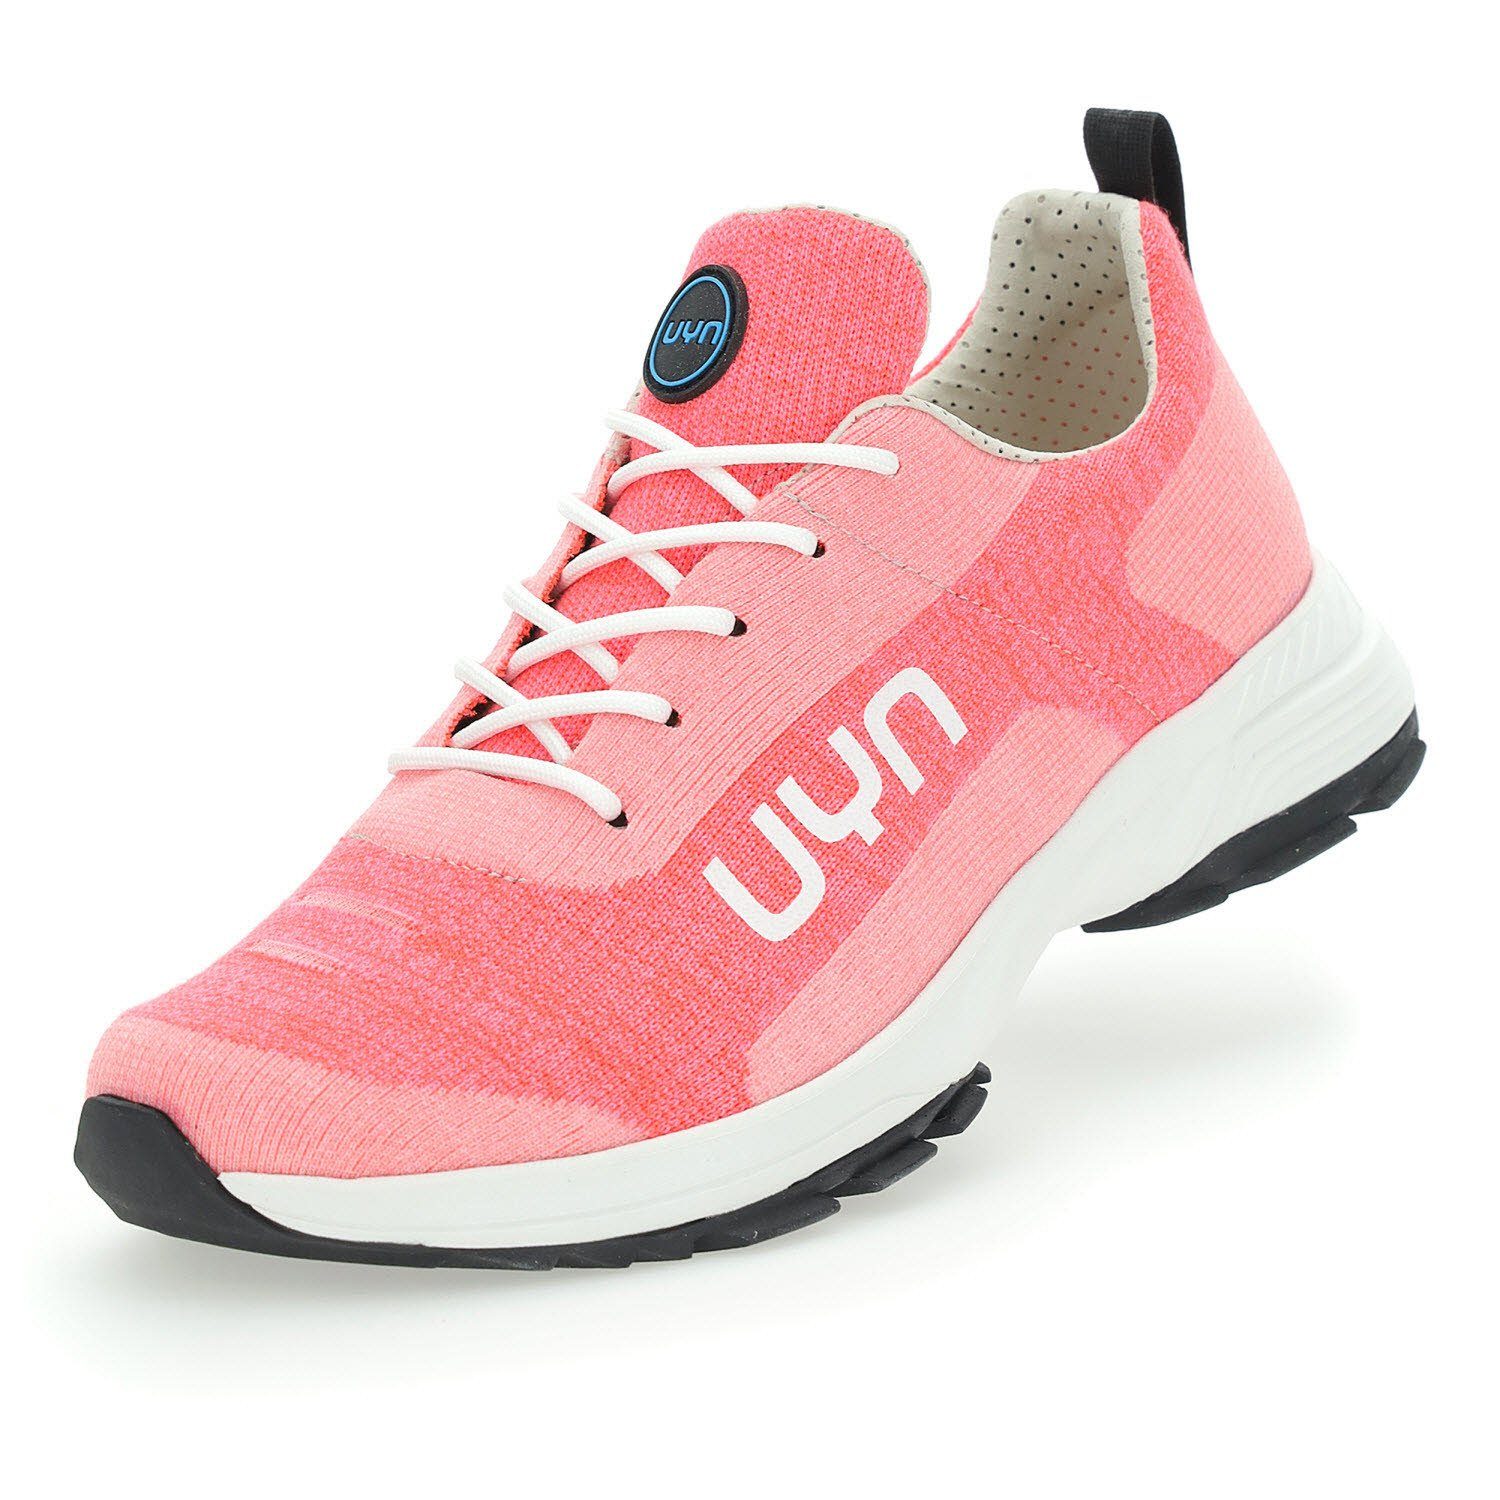 UYN Air Dual XC Shoes Lady Sneaker P042 pink